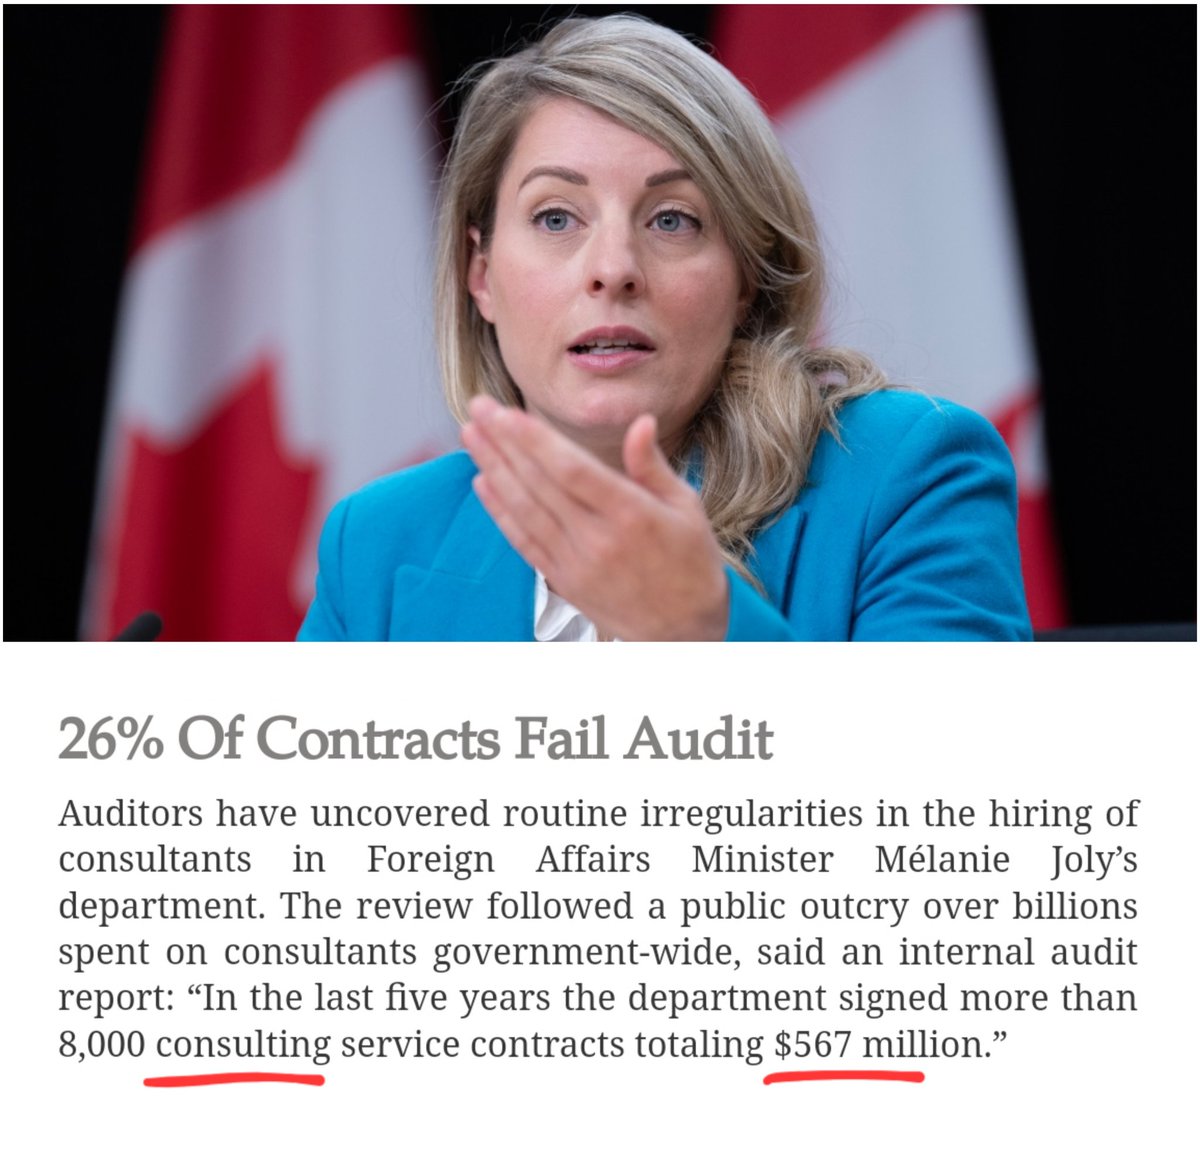 Liberal MP Mélanie Joly's department spent over $567M on 8,000 consulting contracts and 26% of them failed an audit.

It's a free for all the pigs at the trought with this government. 
Every single department is completely mismanaged and costing tax payers billions.

The next